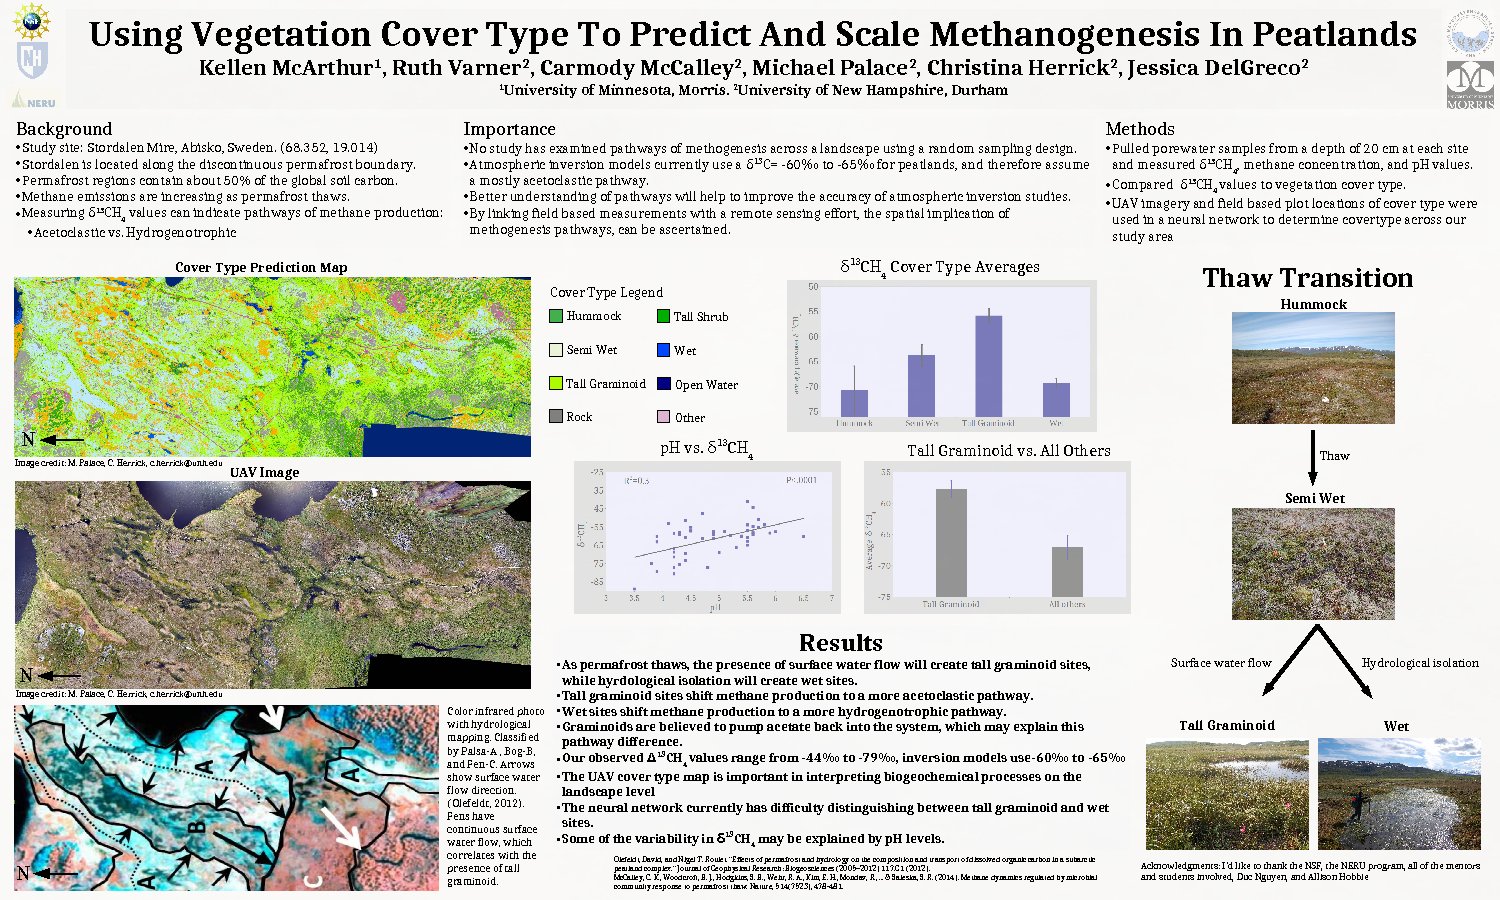 Using Vegetation Cover Type To Predict And Scale Methanogenesis In Peatlands by rakerwin